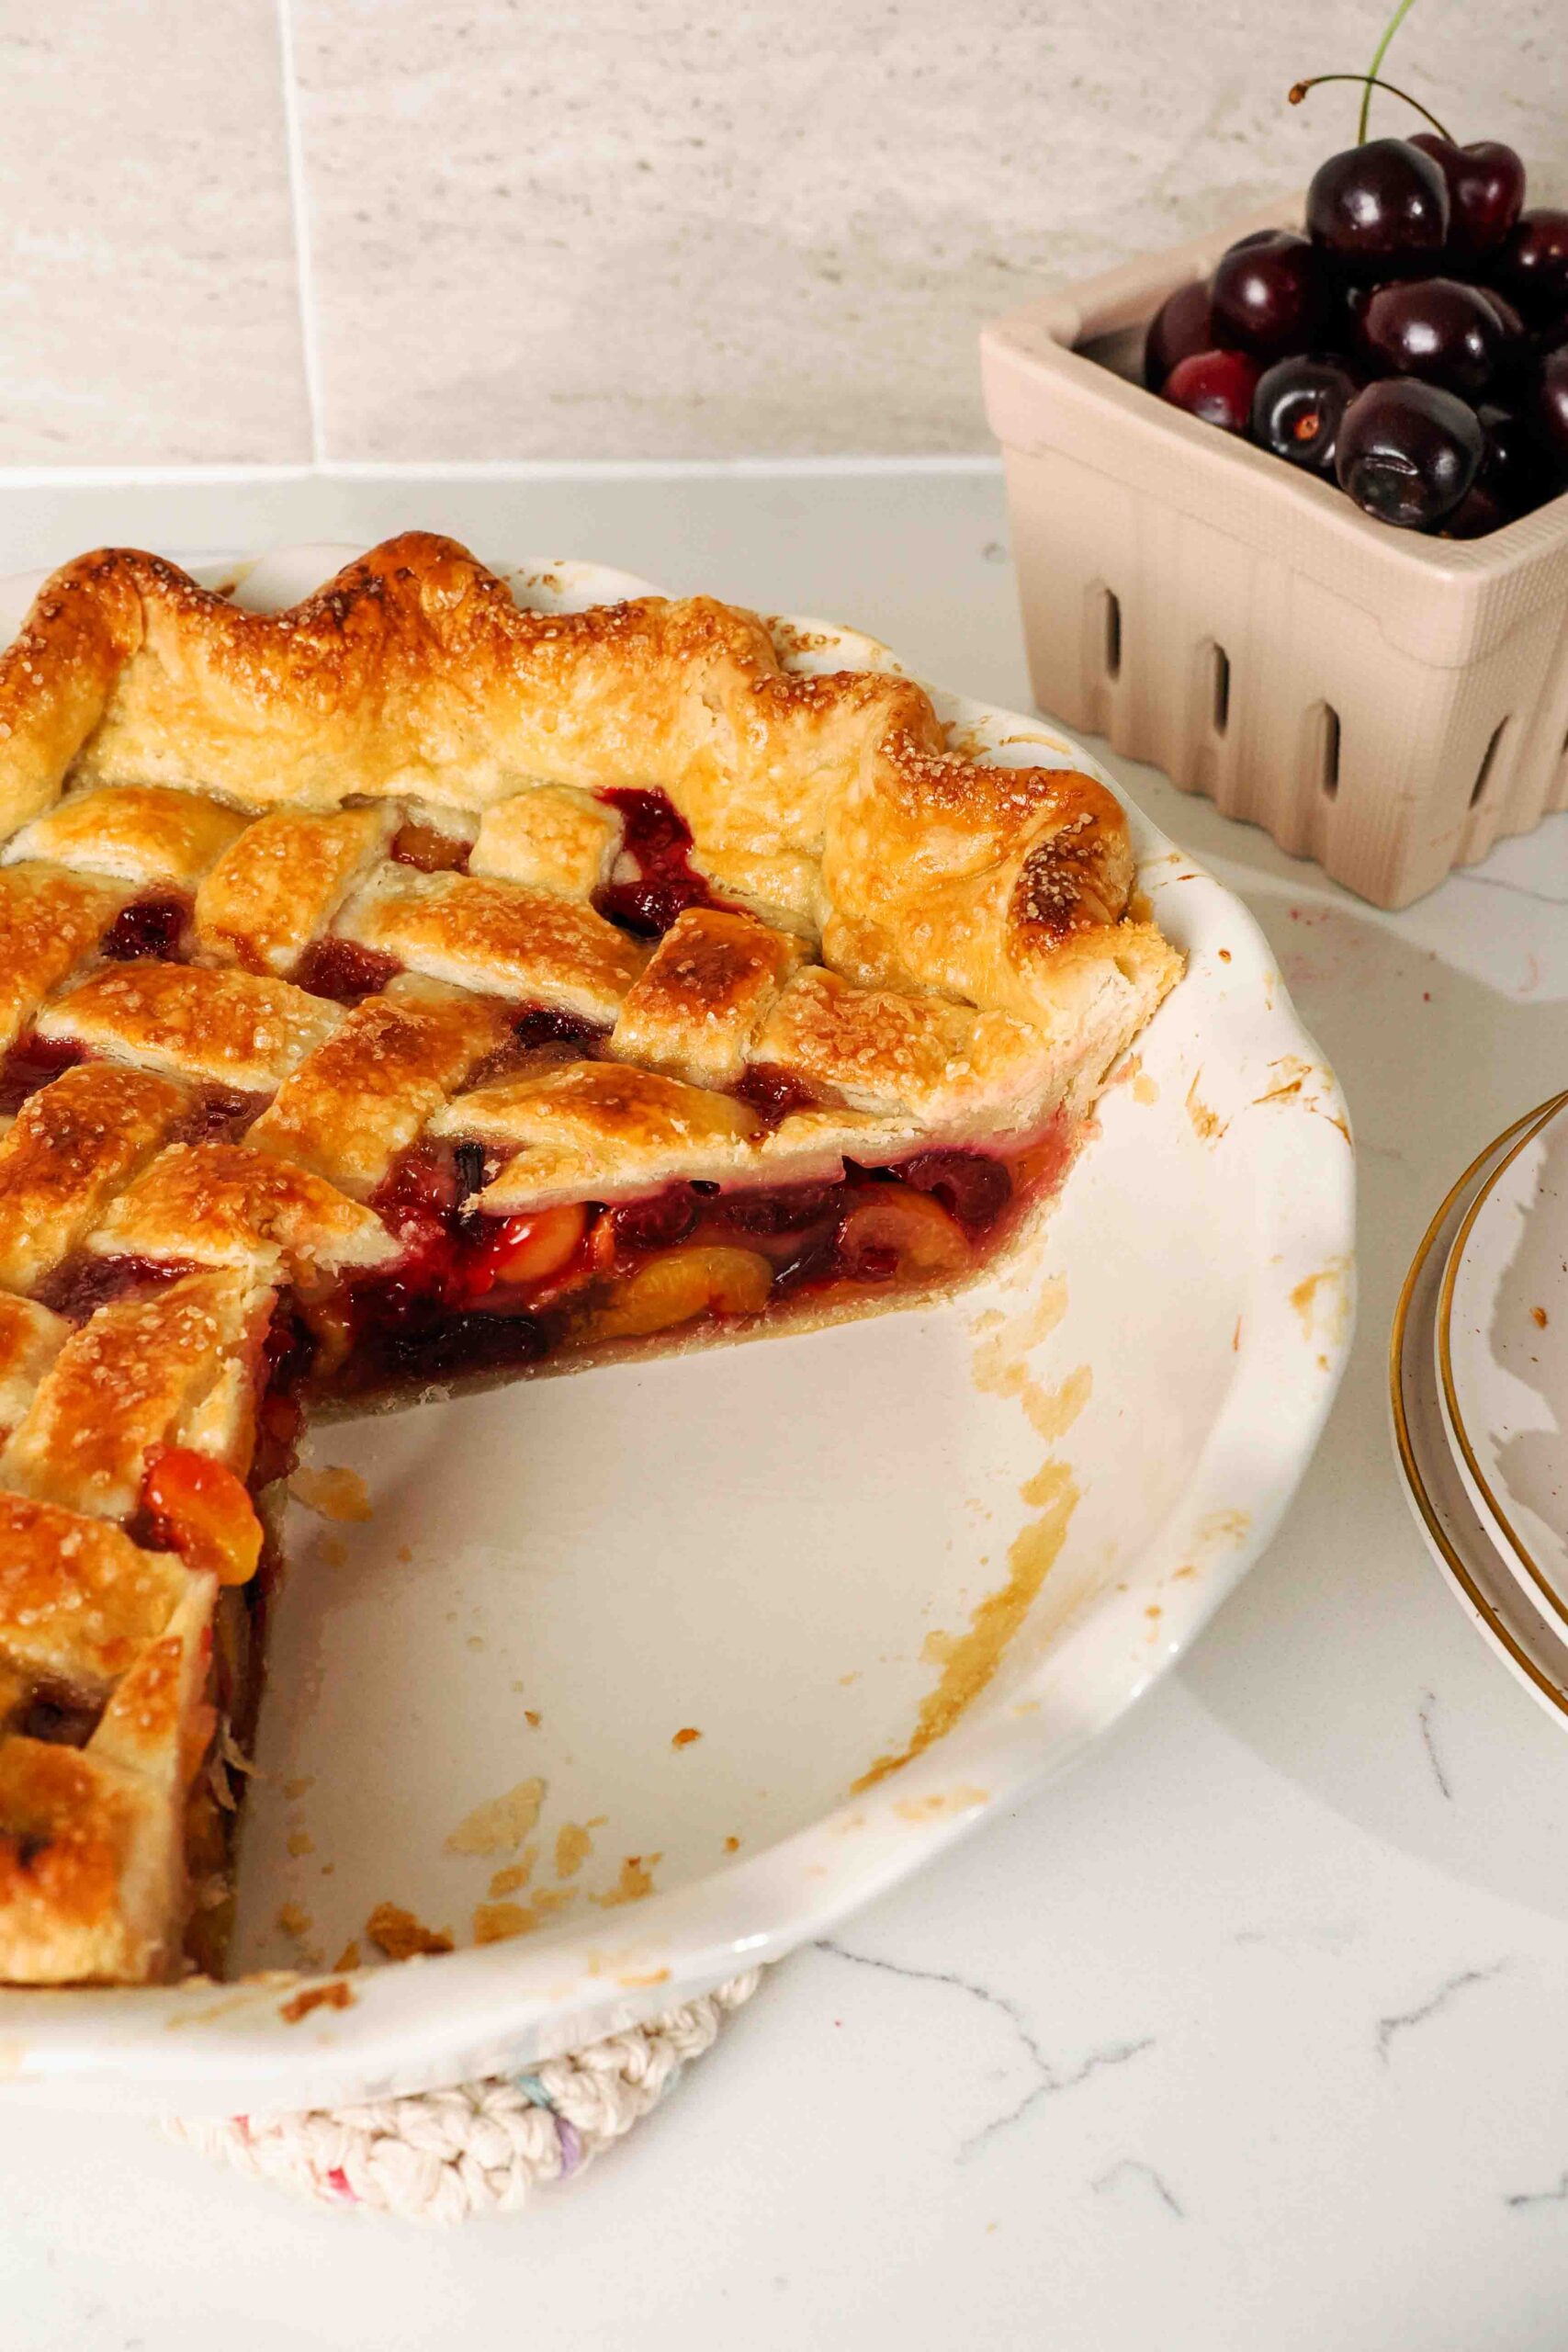 A quarter of a cherry pie is missing from a pie pan.